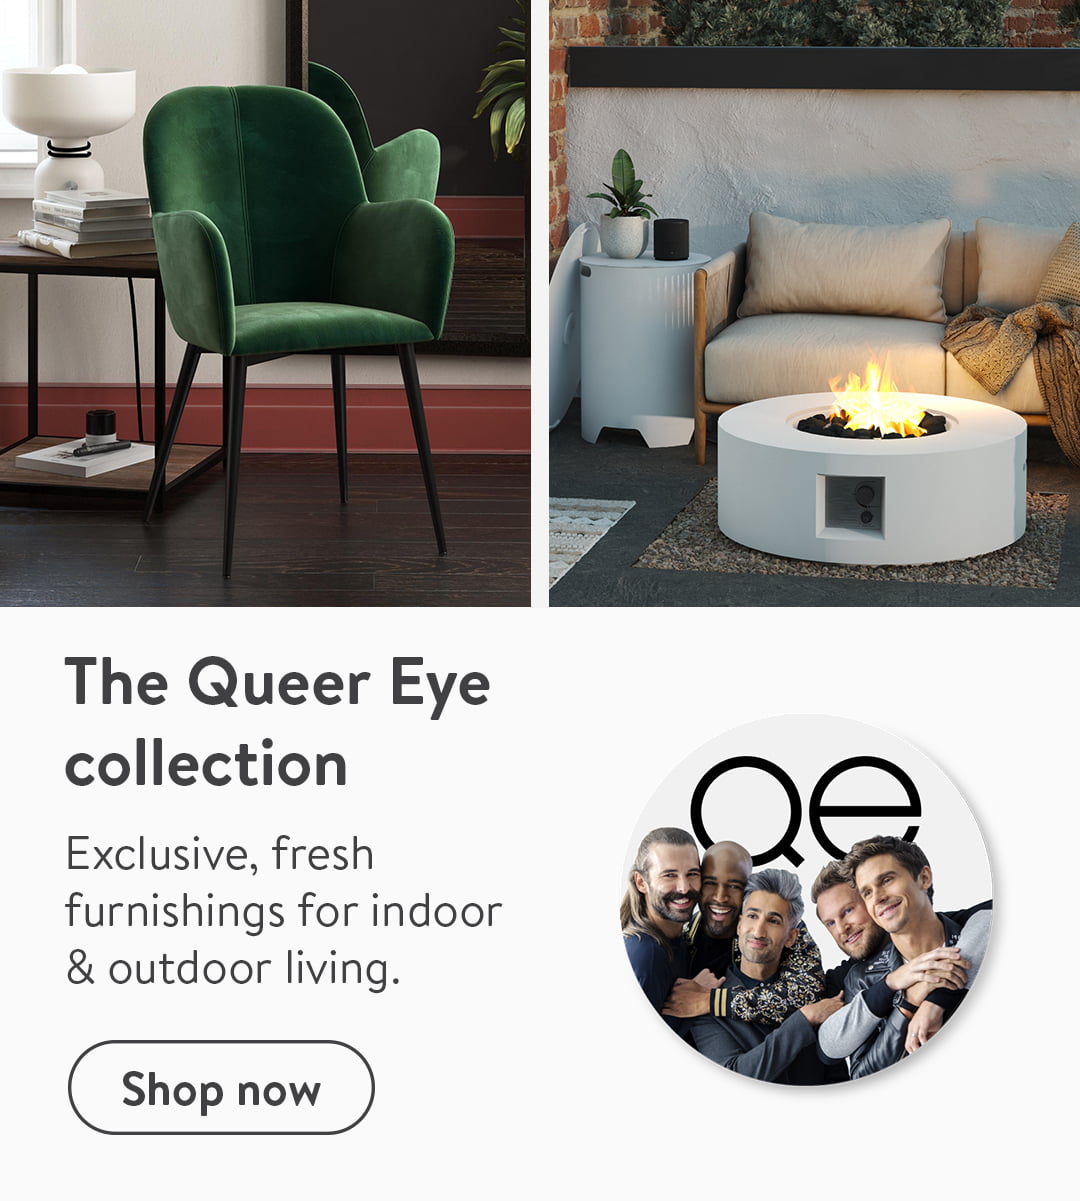 The Queer Eye collection